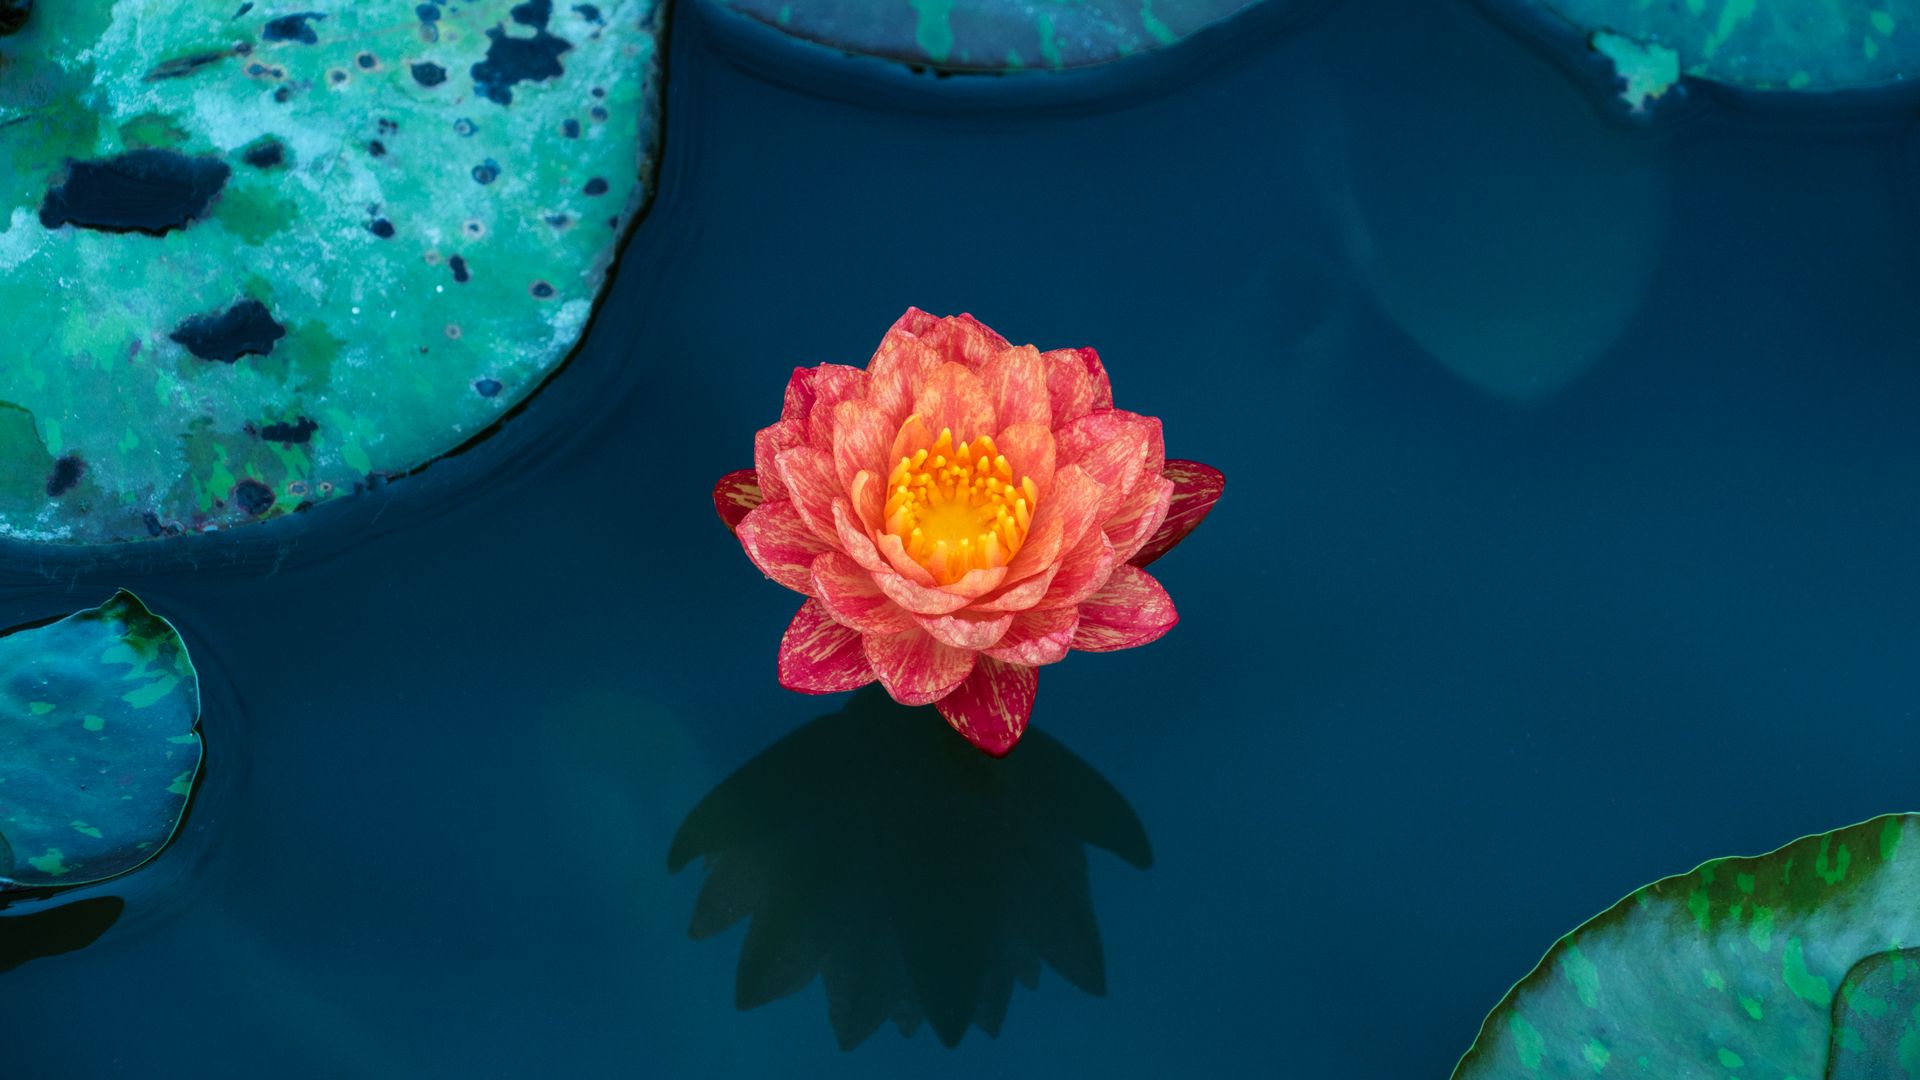 Download wallpaper 1920x1080 lotus, water lily, water, petals, leaves full  hd, hdtv, fhd, 1080p hd background